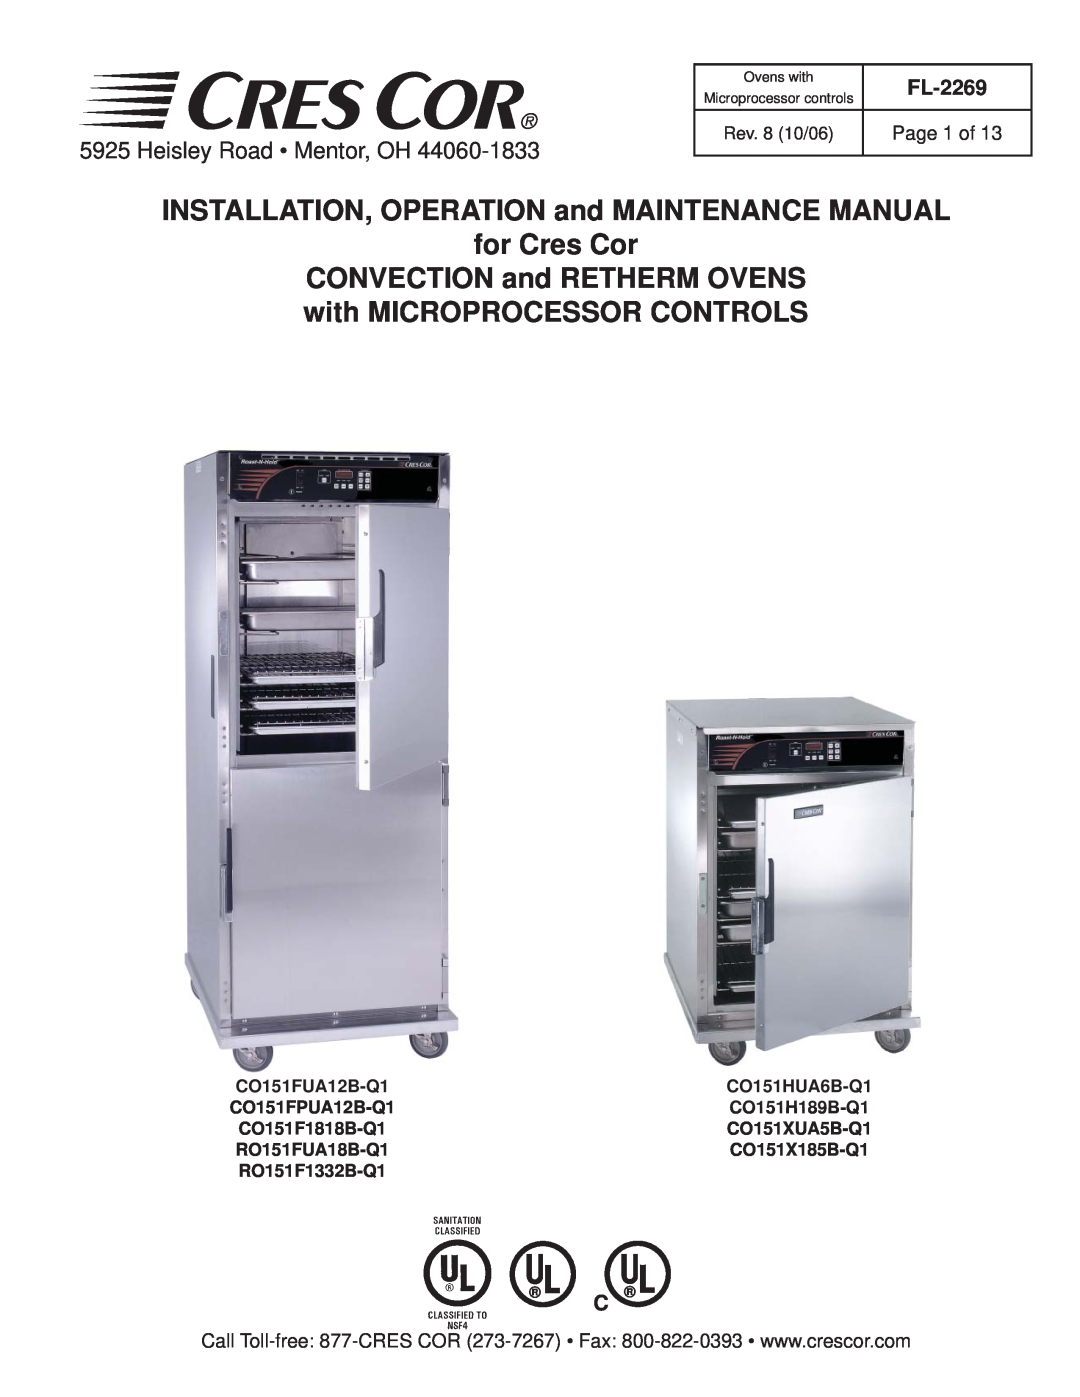 Cres Cor CO151H189B-Q1 manual INSTALLATION, OPERATION and MAINTENANCE MANUAL, for Cres Cor, Heisley Road Mentor, OH 